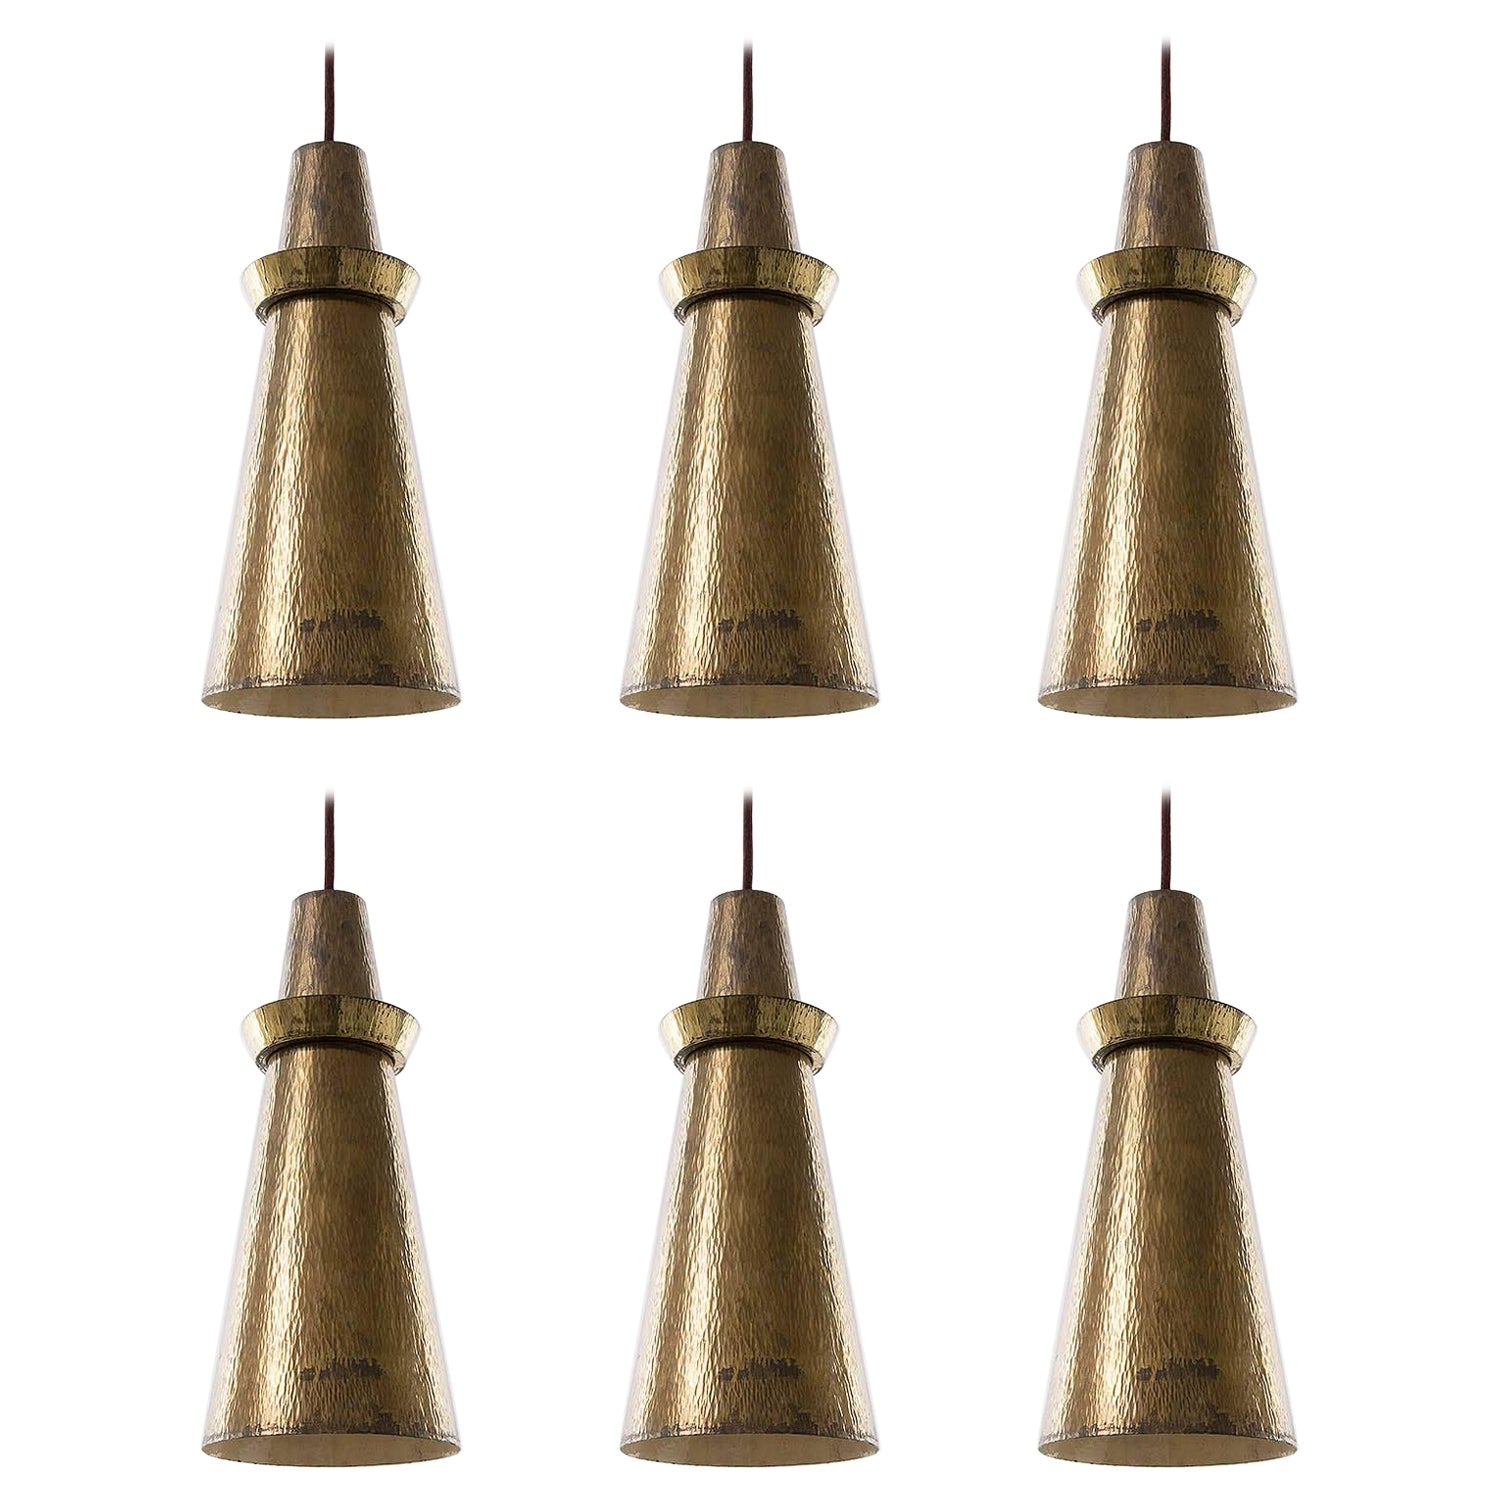 One of Six Pendant Lights, Hammered Patinated Brass, 1960s For Sale